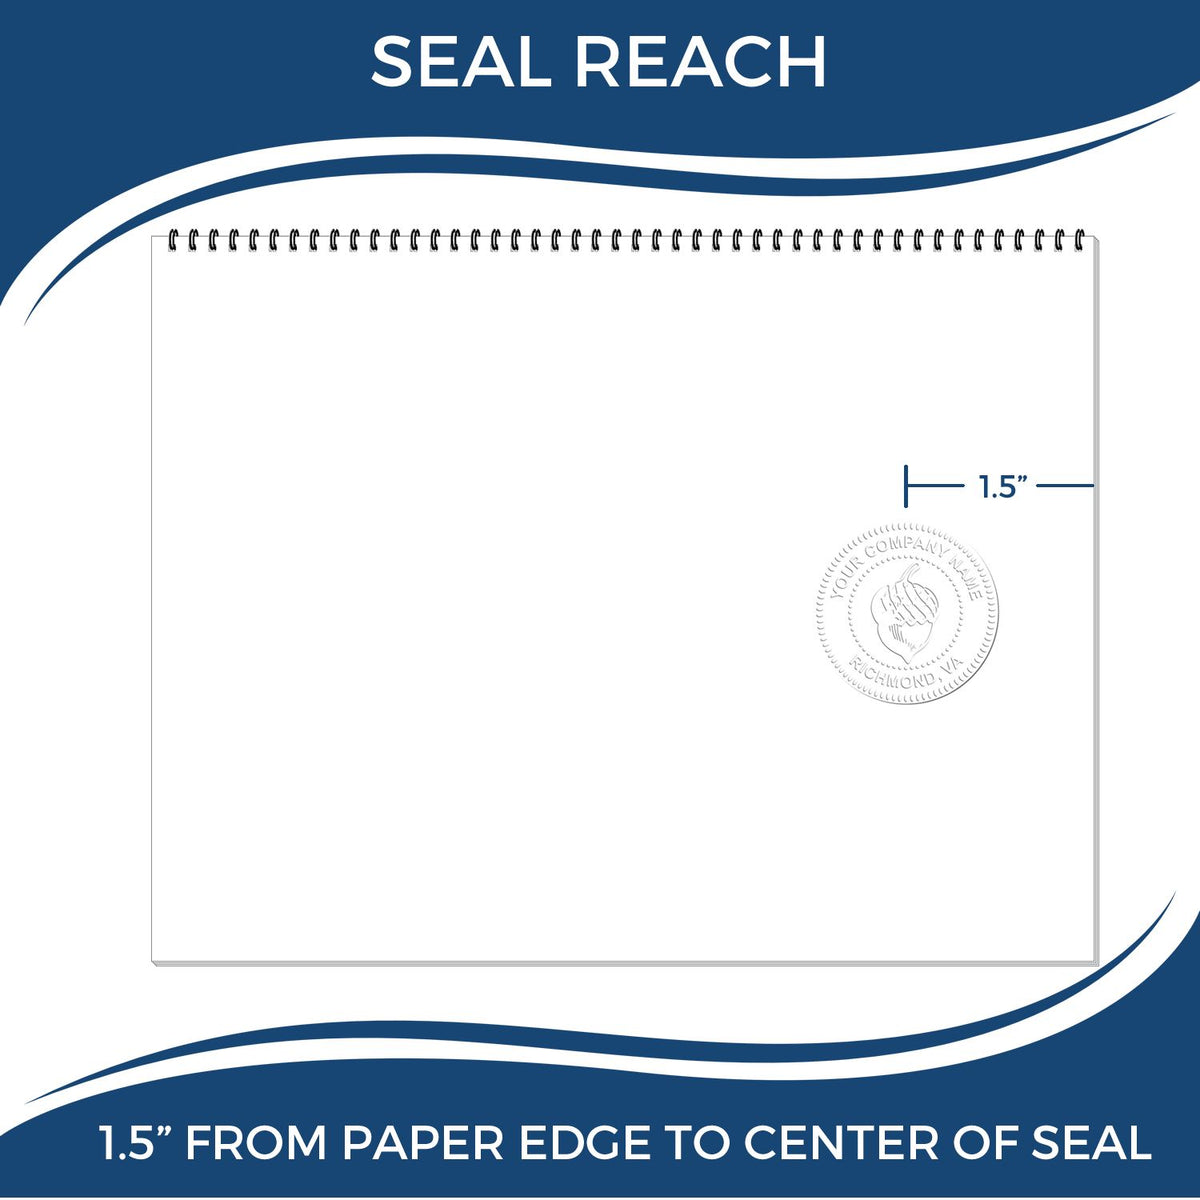 An infographic showing the seal reach which is represented by a ruler and a miniature seal image of the Hybrid Georgia Landscape Architect Seal